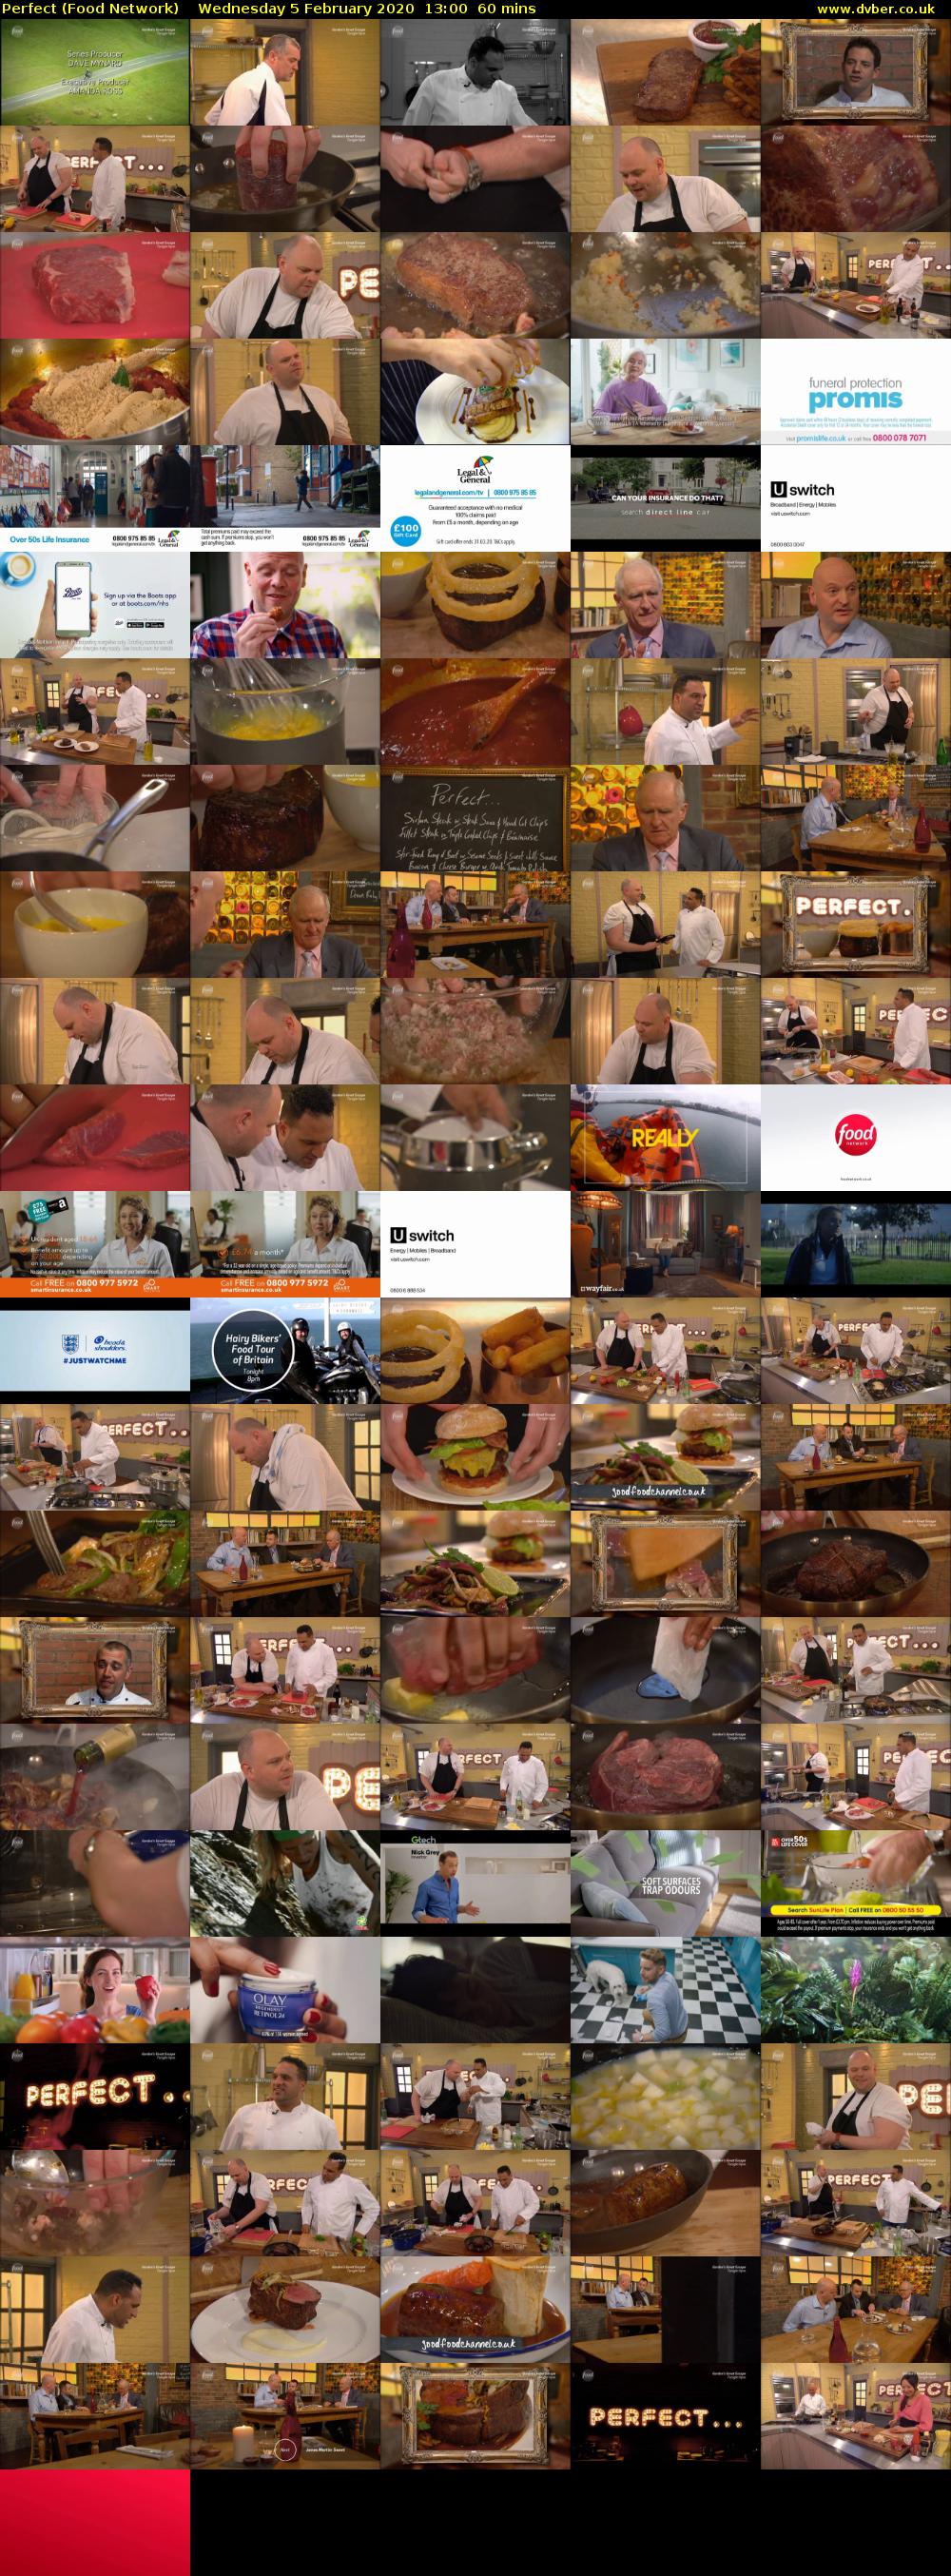 Perfect (Food Network) Wednesday 5 February 2020 13:00 - 14:00